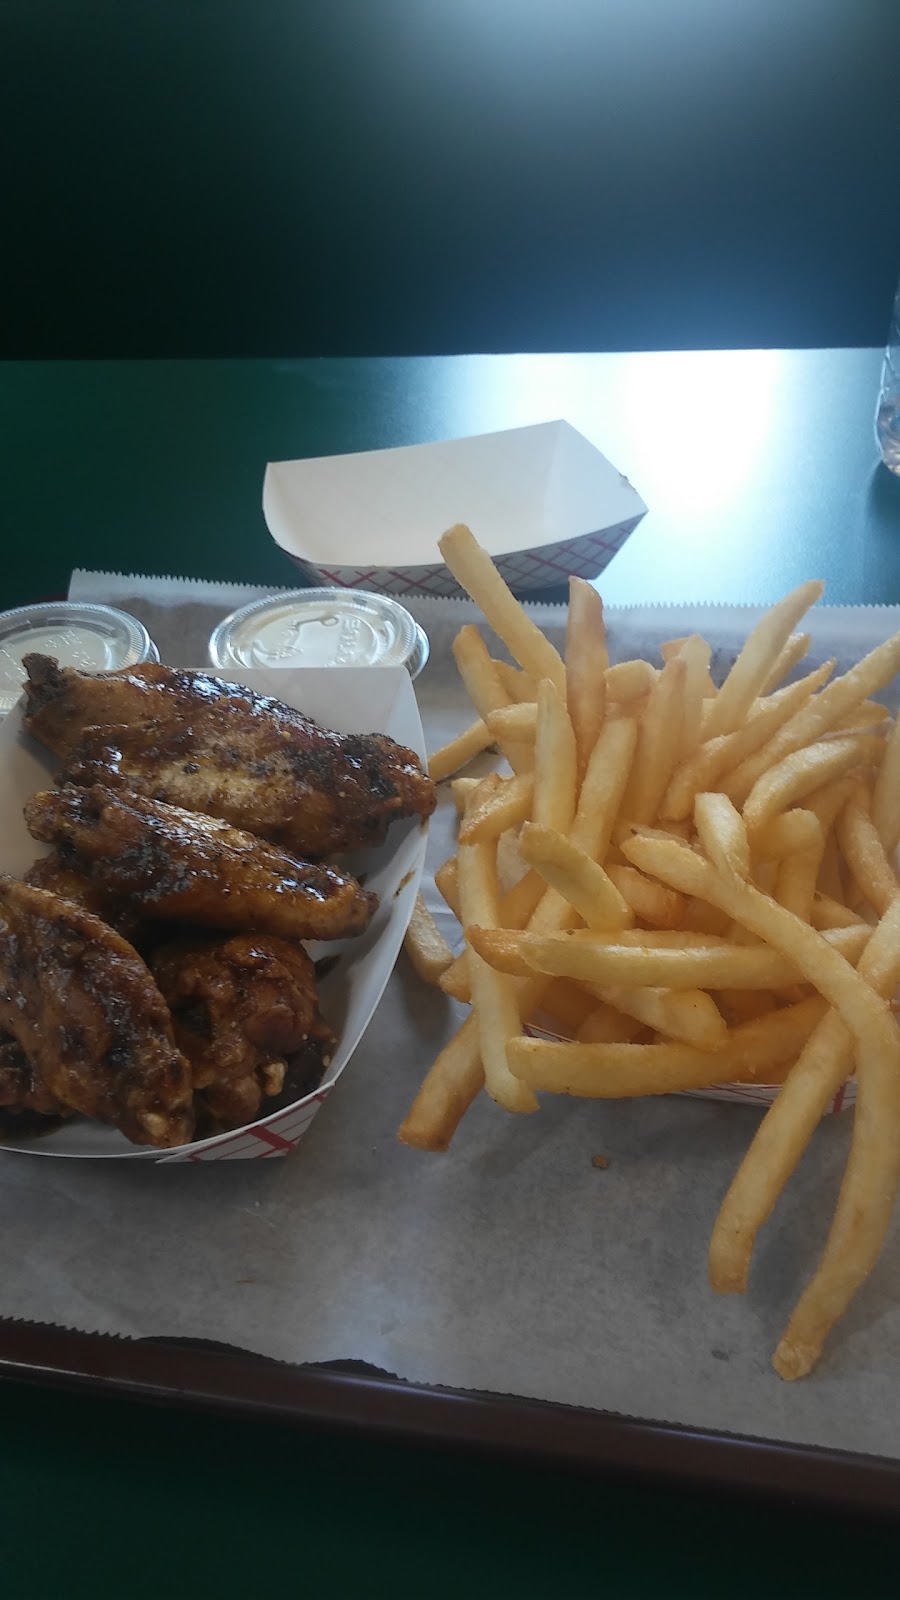 HJ Wings & Things Express | 565 Hwy 74 S, Peachtree City, GA 30269, USA | Phone: (678) 833-0655